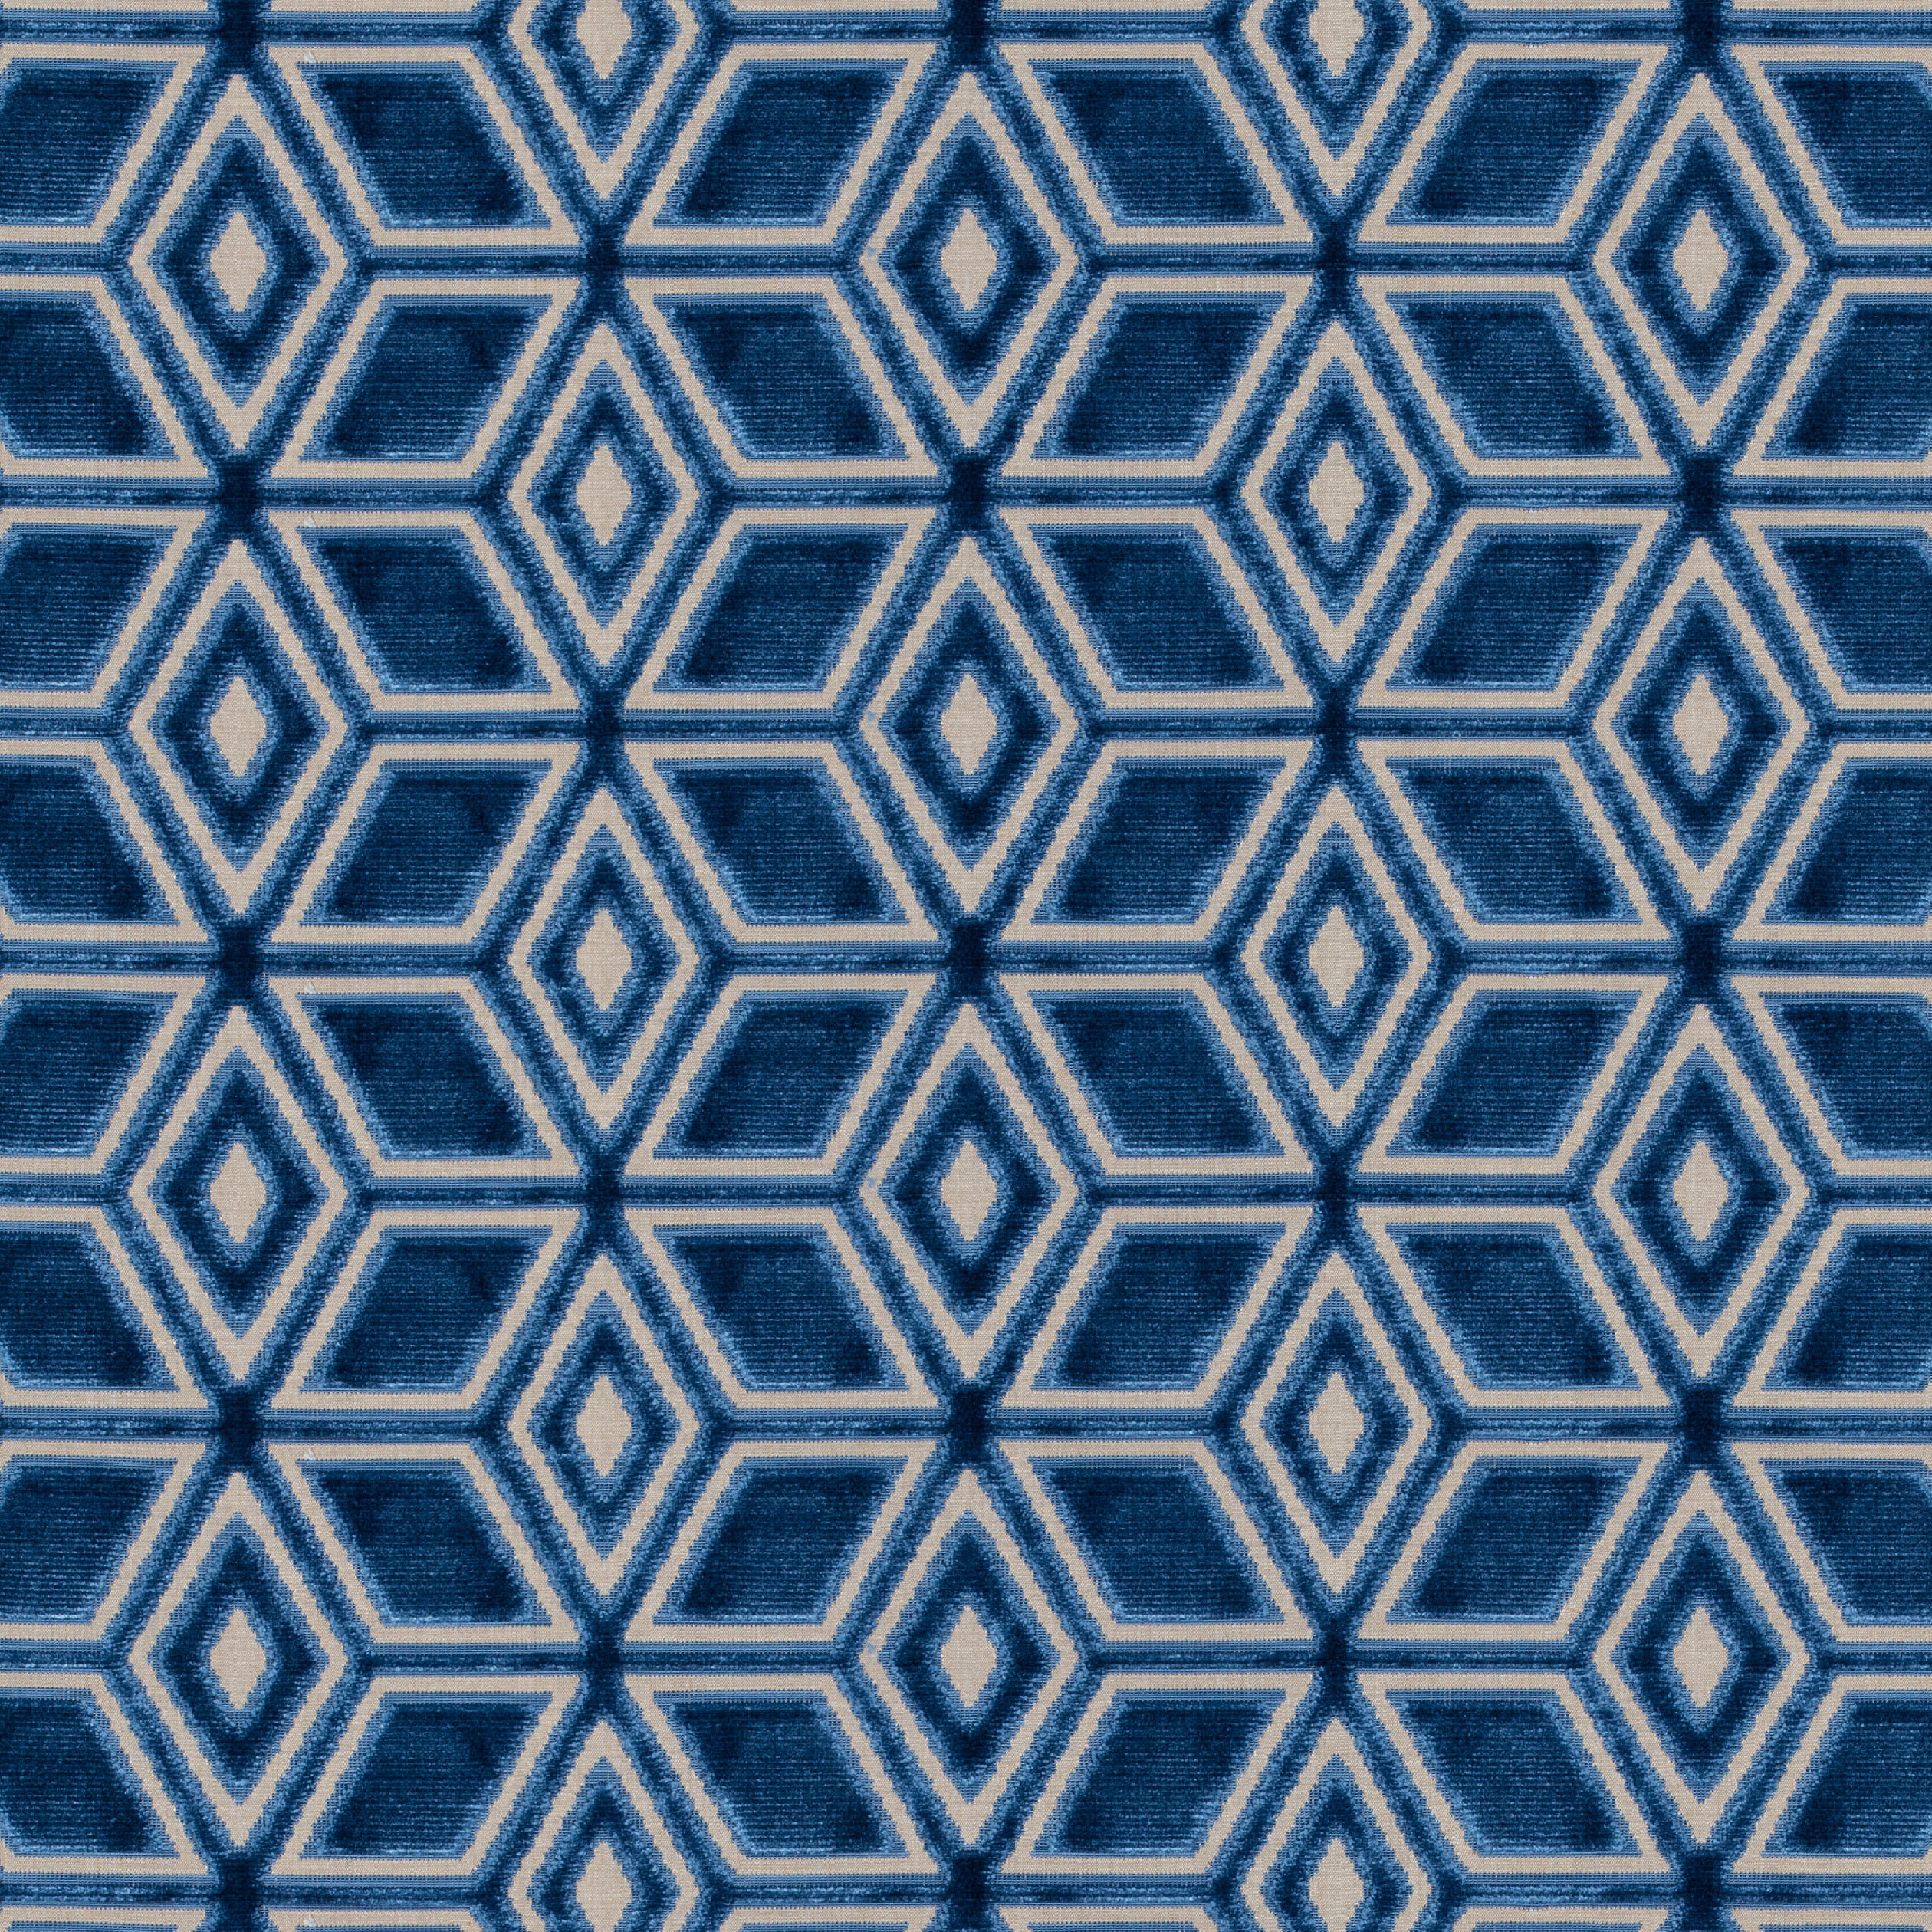 Jardin Maze fabric in navy color - pattern number AW72986 - by Anna French in the Manor collection